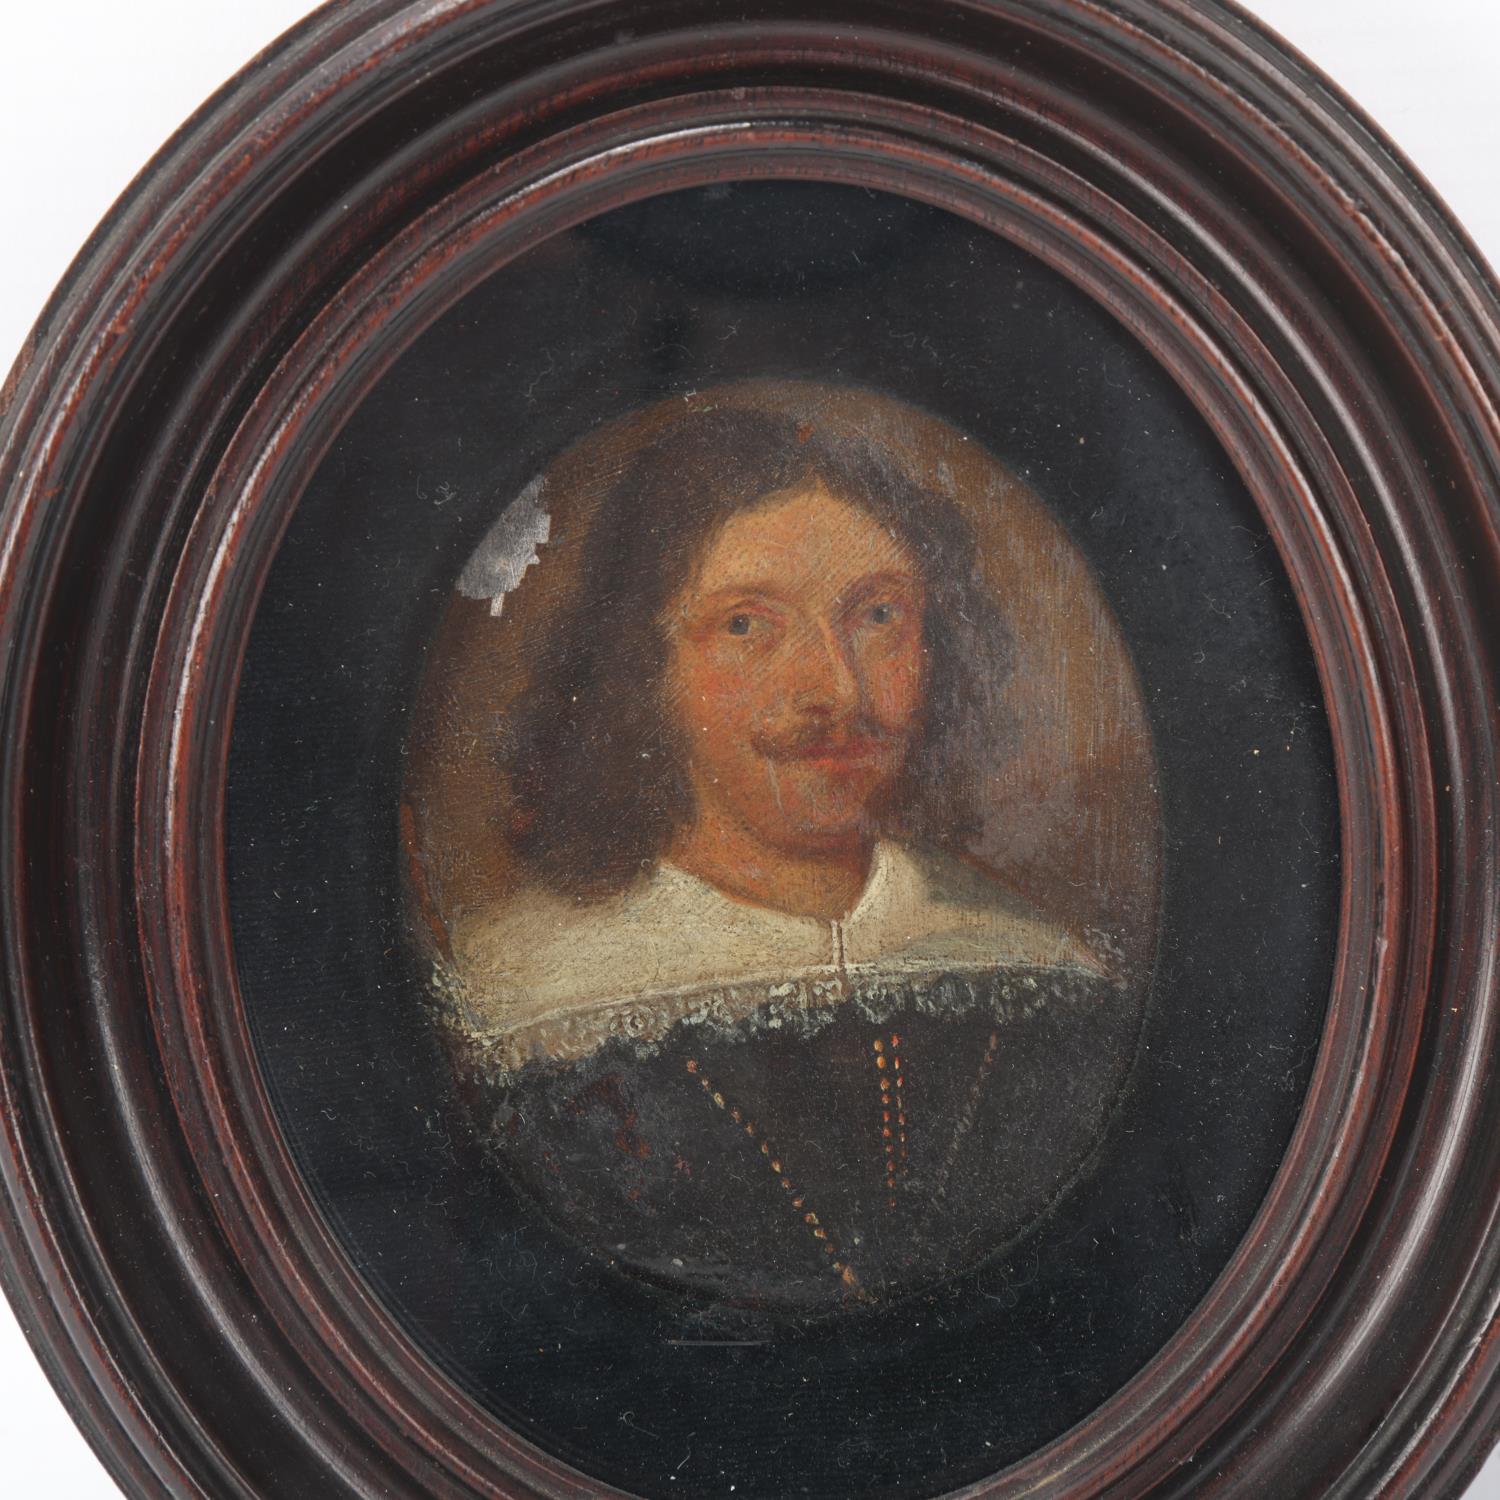 Miniature oil on metal, portrait of a man wearing a lace collar, probably 18th century, unsigned, in - Image 2 of 3